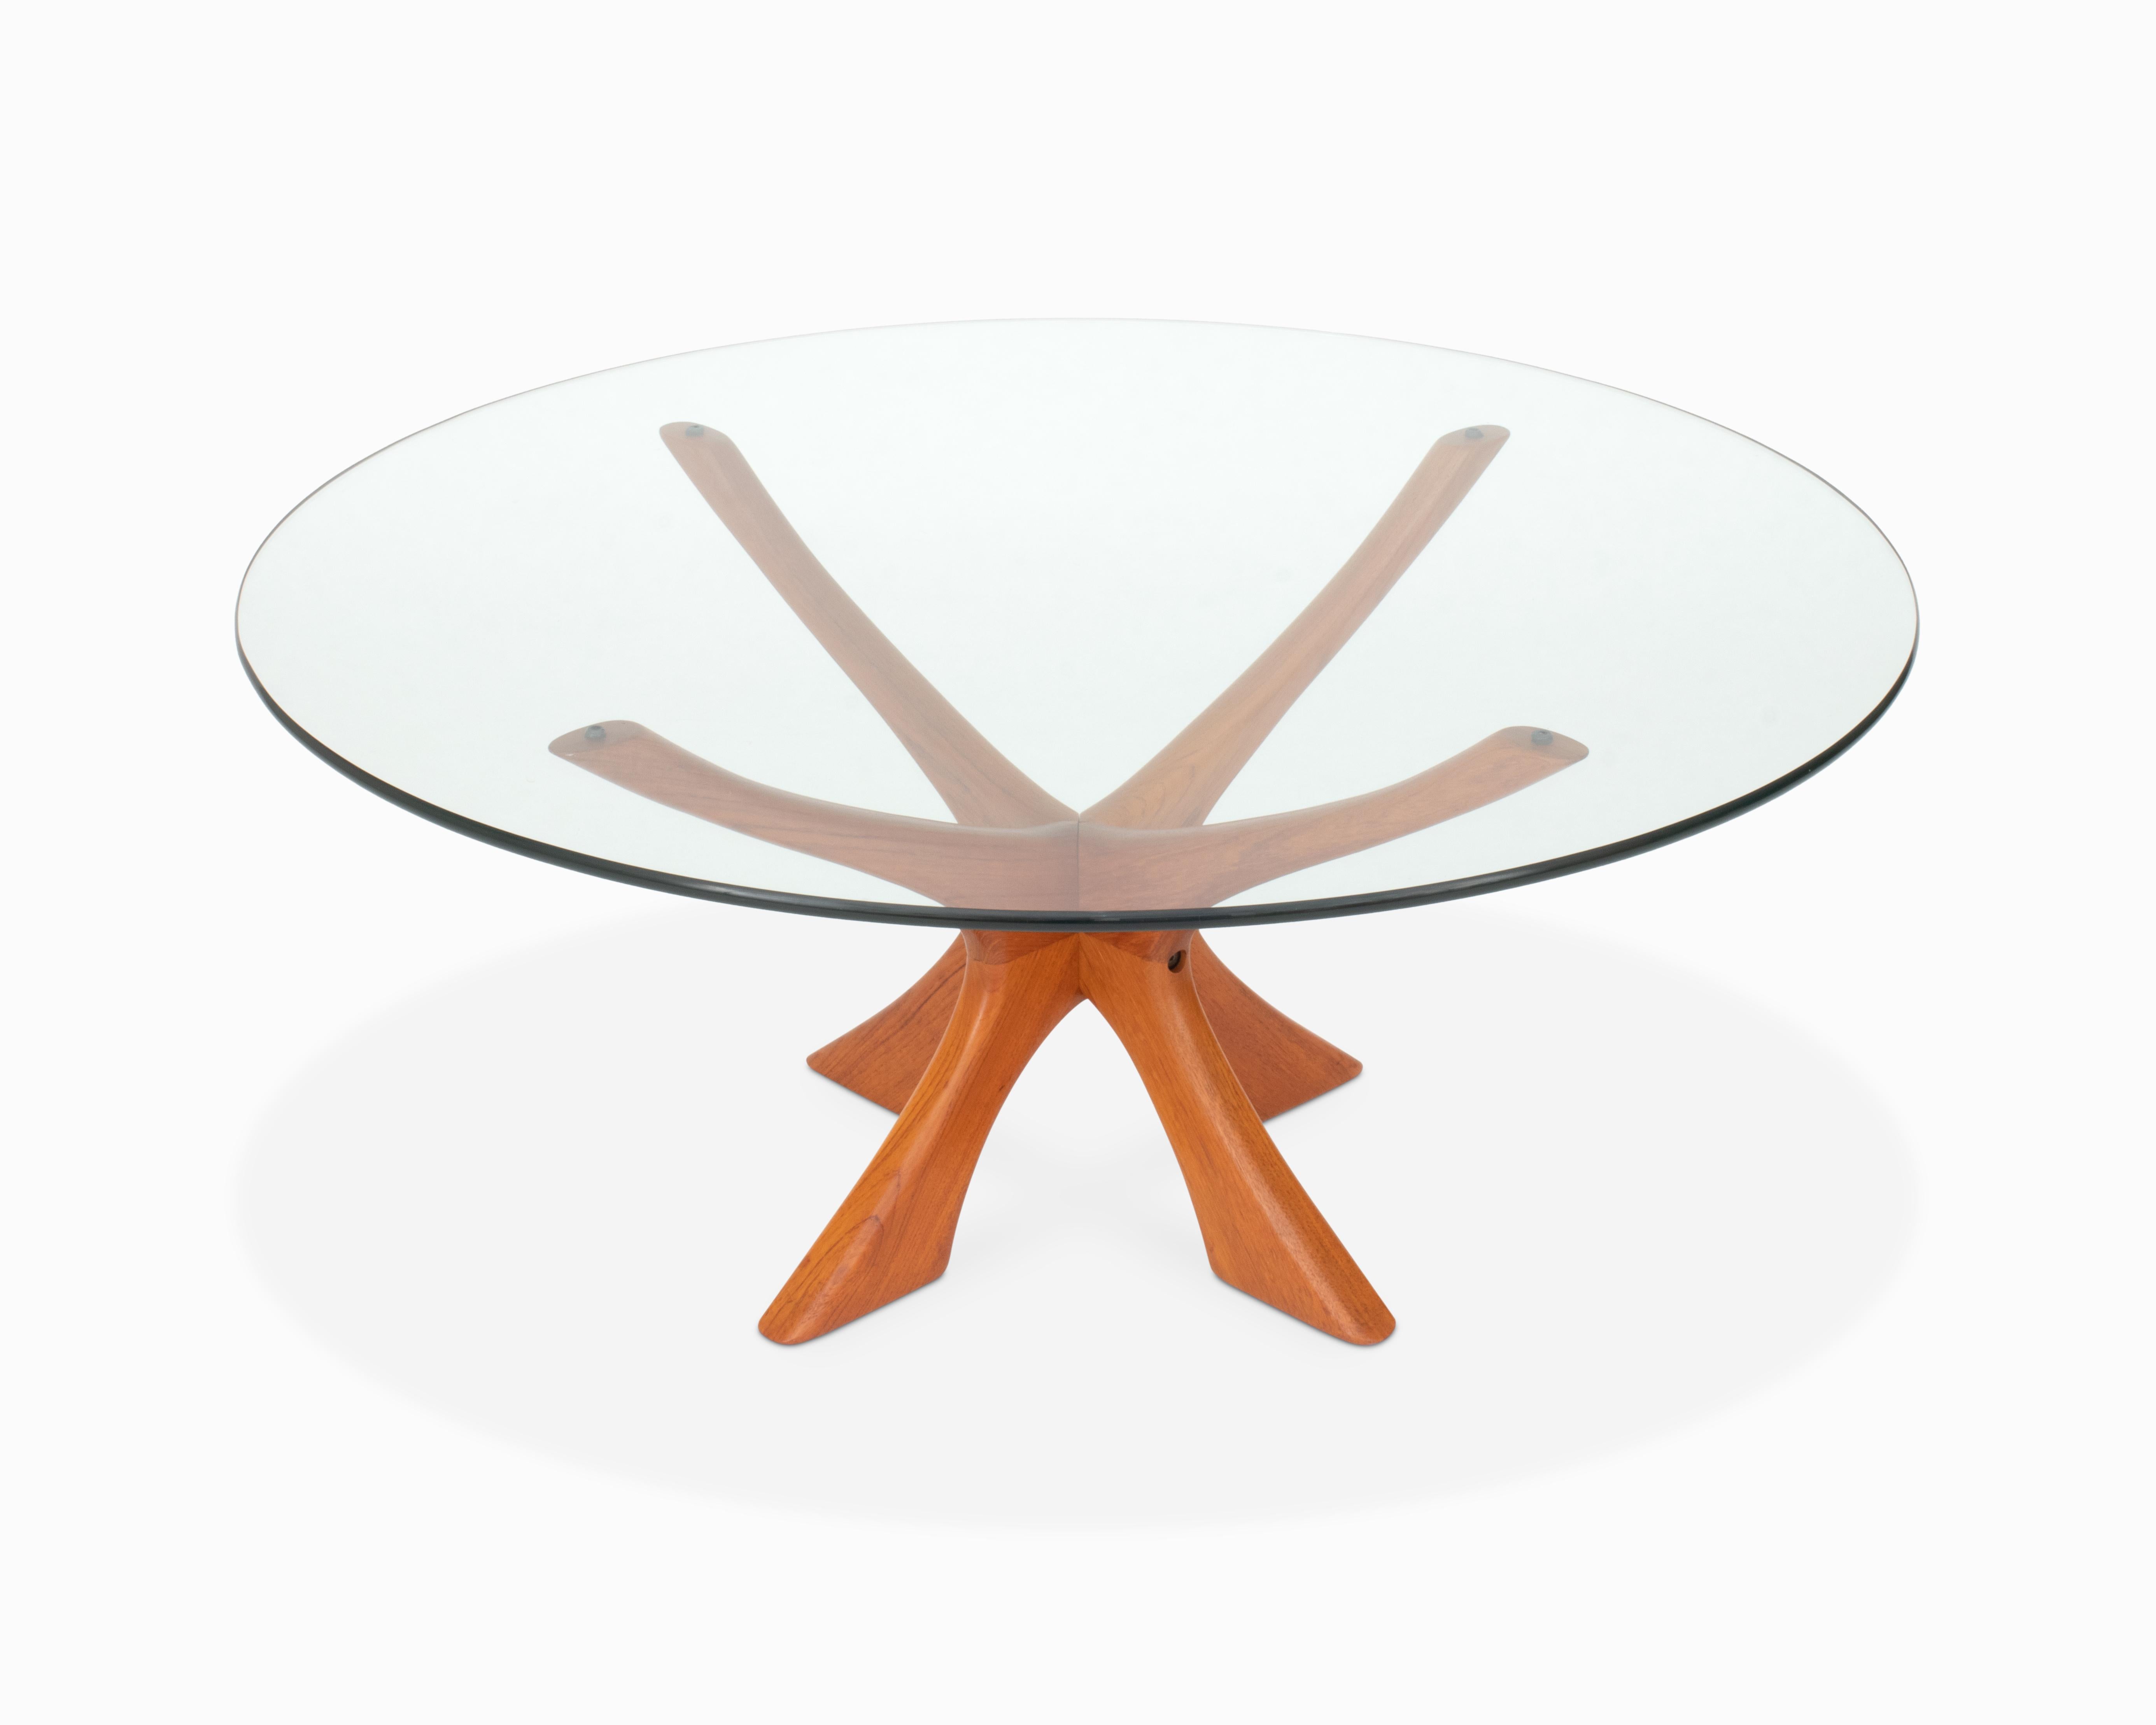 Here is a vintage Danish modern coffee table by Illum Wikkelsø, featuring a 41.25